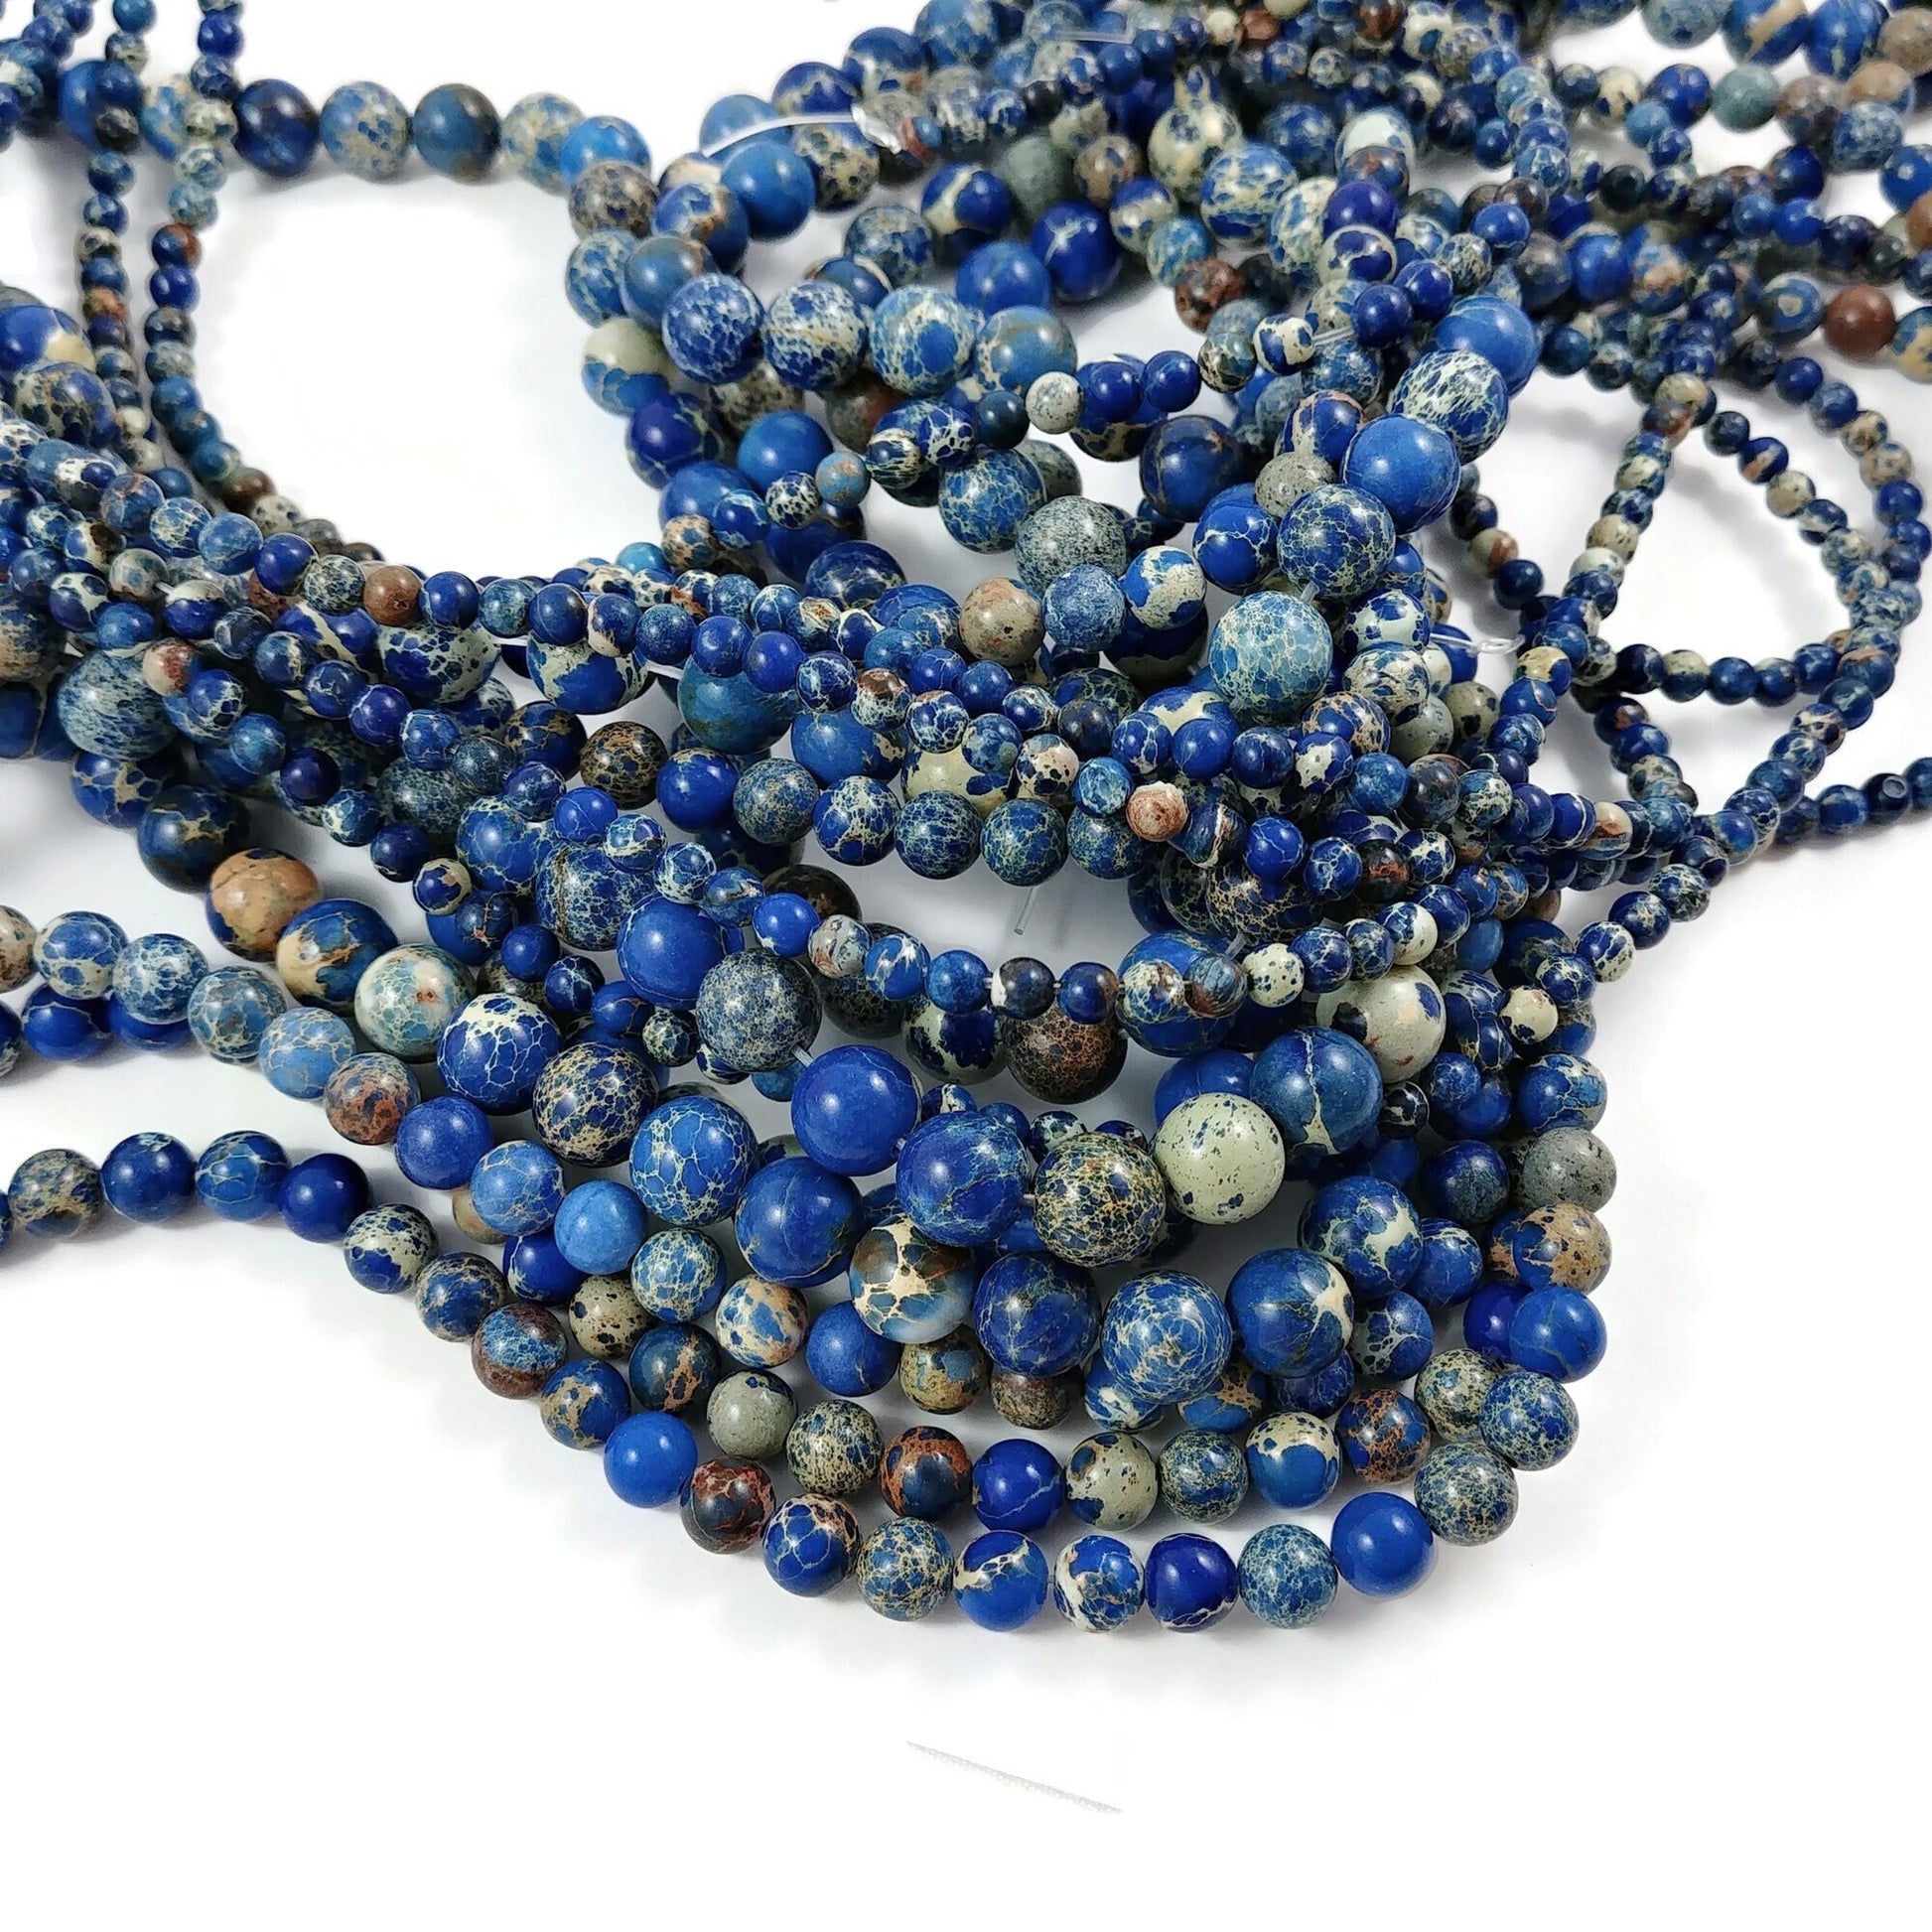 Blue imperial jasper stone beads, 4mm, 6mm, 8mm round gemstone for jewelry making